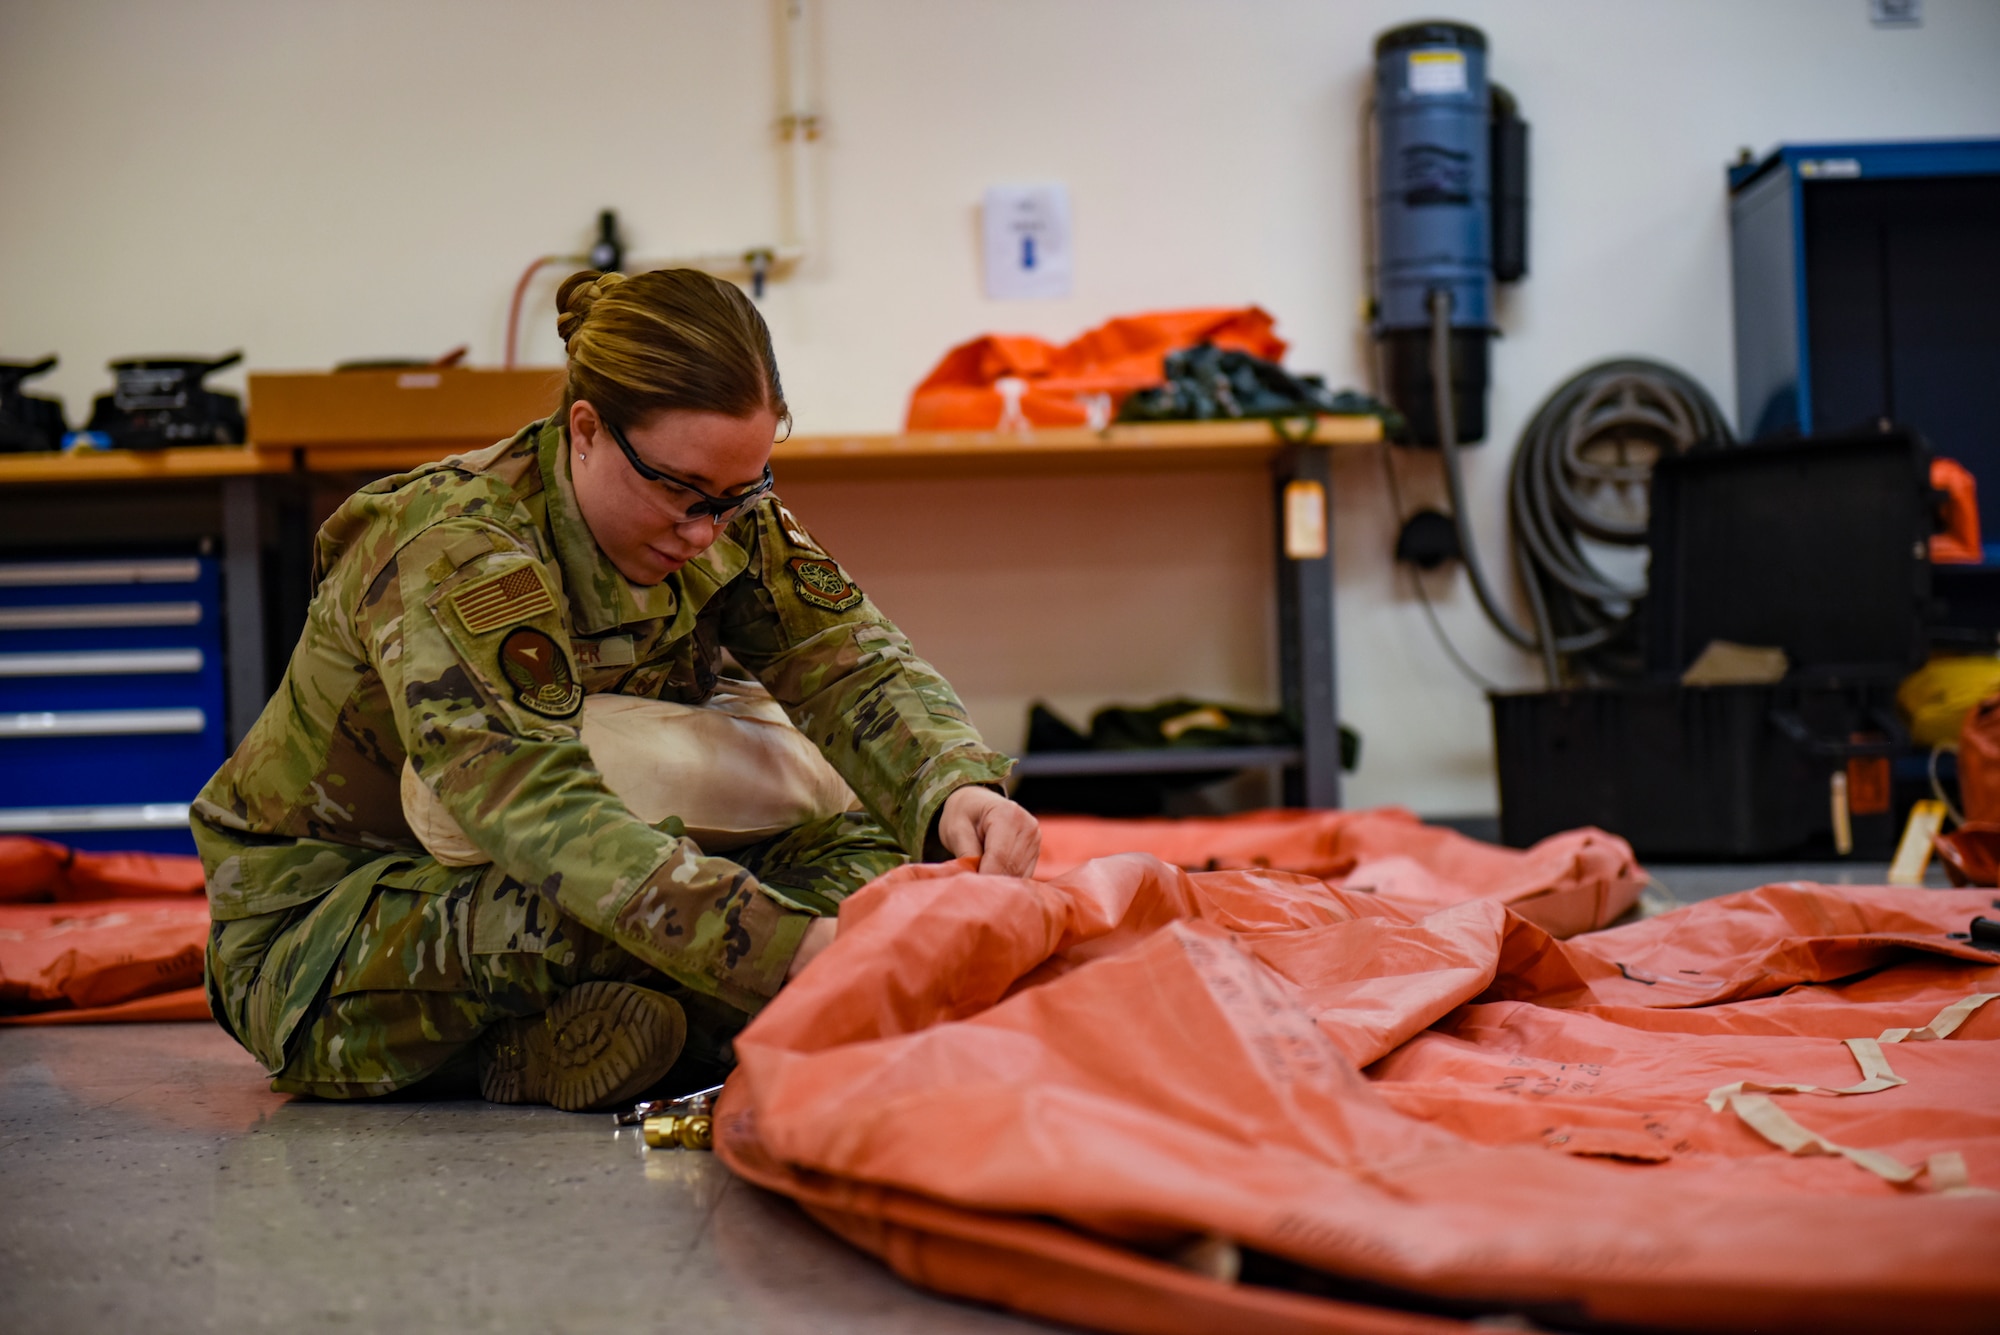 U.S. Air Force Staff Sgt. Nicole Harper, 92nd Operation Support Squadron Aircrew Flight Equipment technician, works on inflating a 20-man raft on Fairchild Air Force Base, Washington, May 3, 2022. AFE ensures mission readiness and safety by thoroughly examining and repairing essential gear. (U.S. Air Force photo by Airmen 1st Class Haiden Morris)